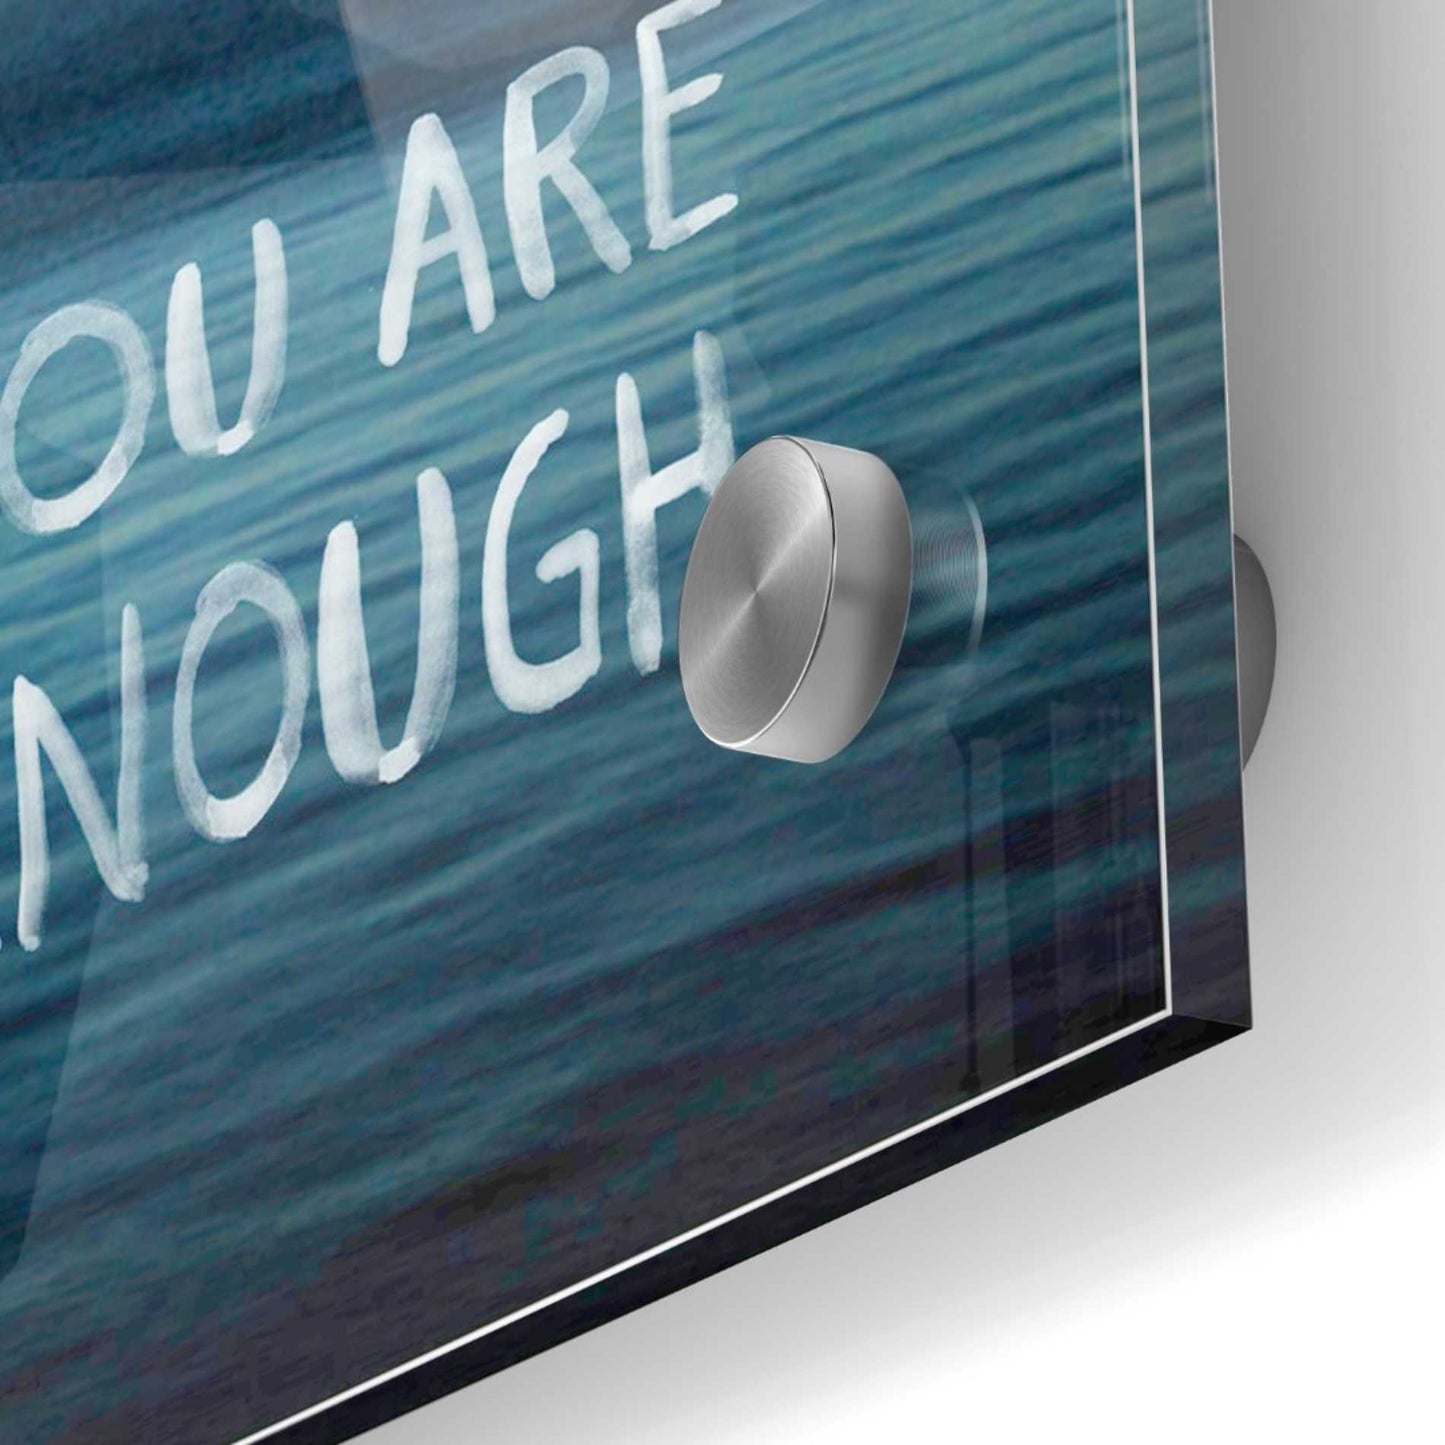 Epic Art 'You Are Enough' by Linda Woods, Acrylic Glass Wall Art,24x24